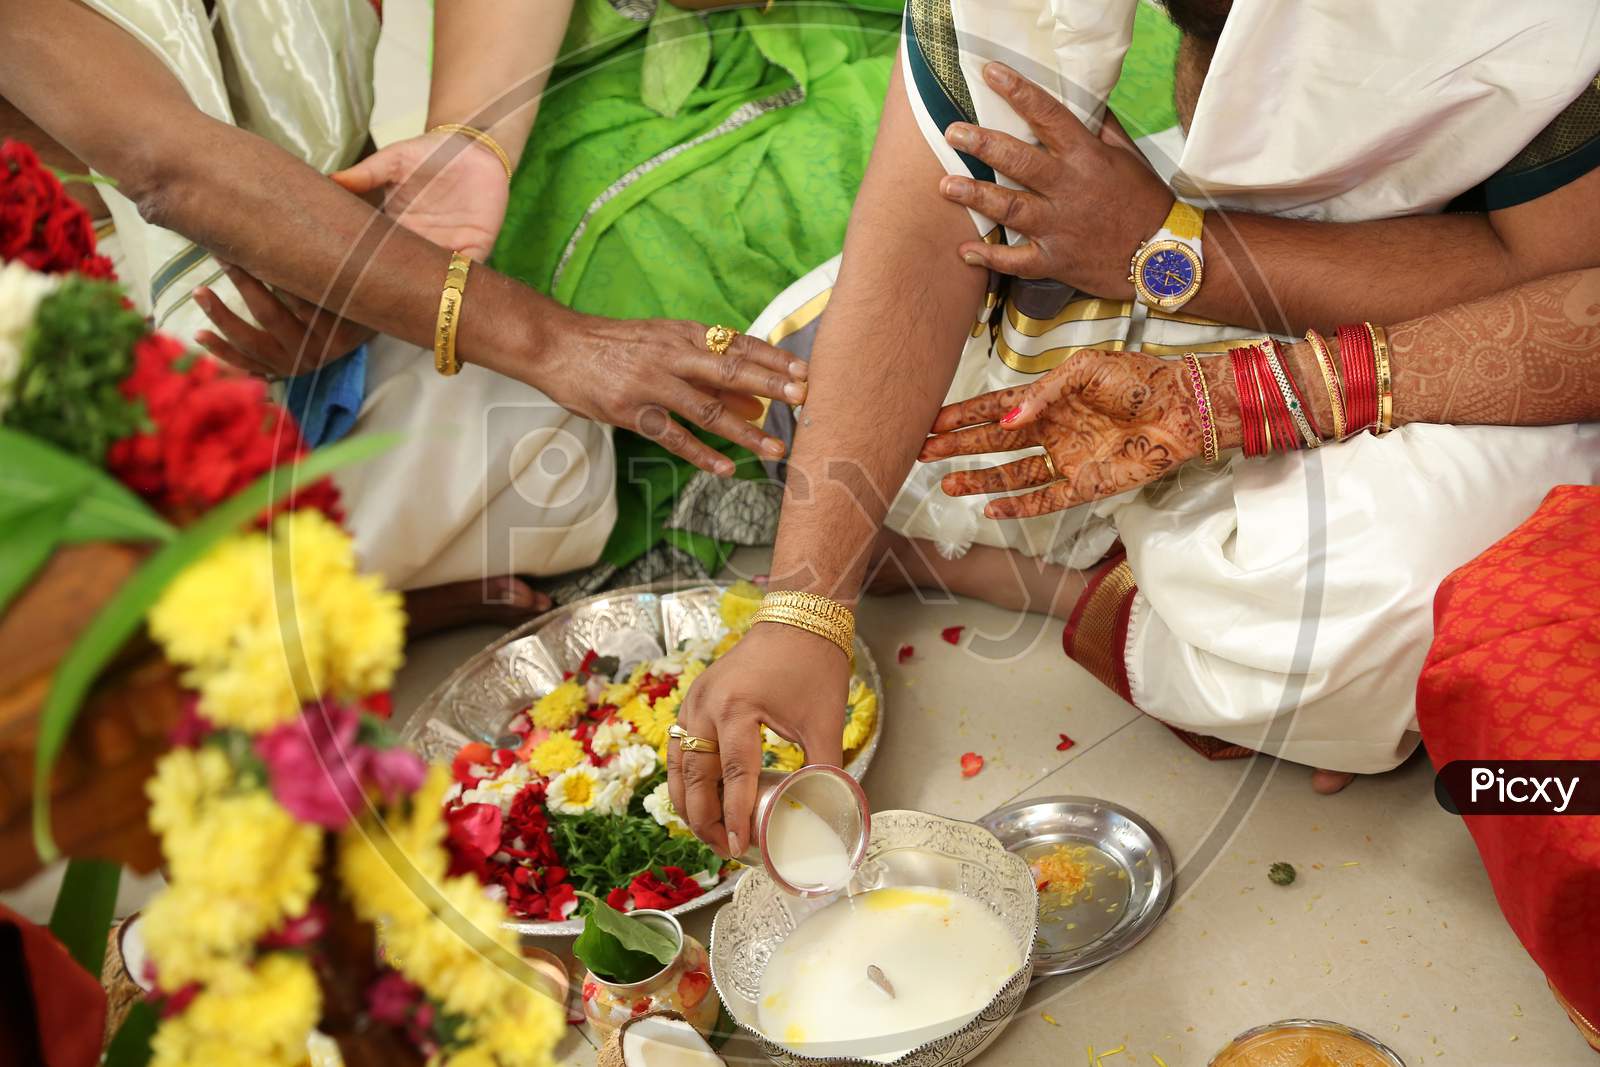 Indian Couple In an Traditional Pooja Or Vratham